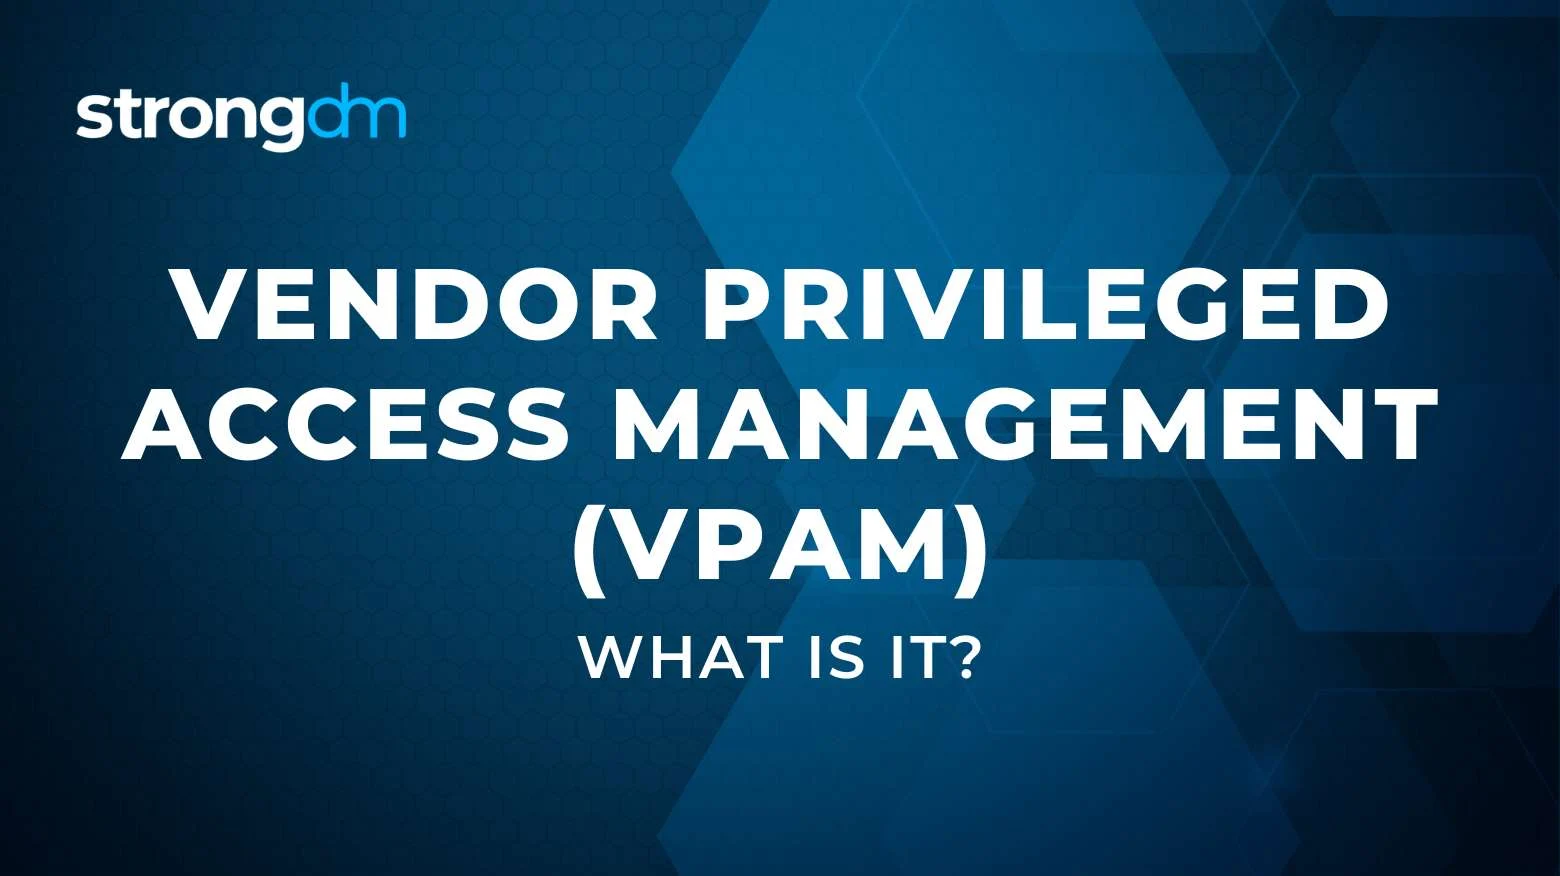 What is Vendor Privileged Access Management (VPAM)?